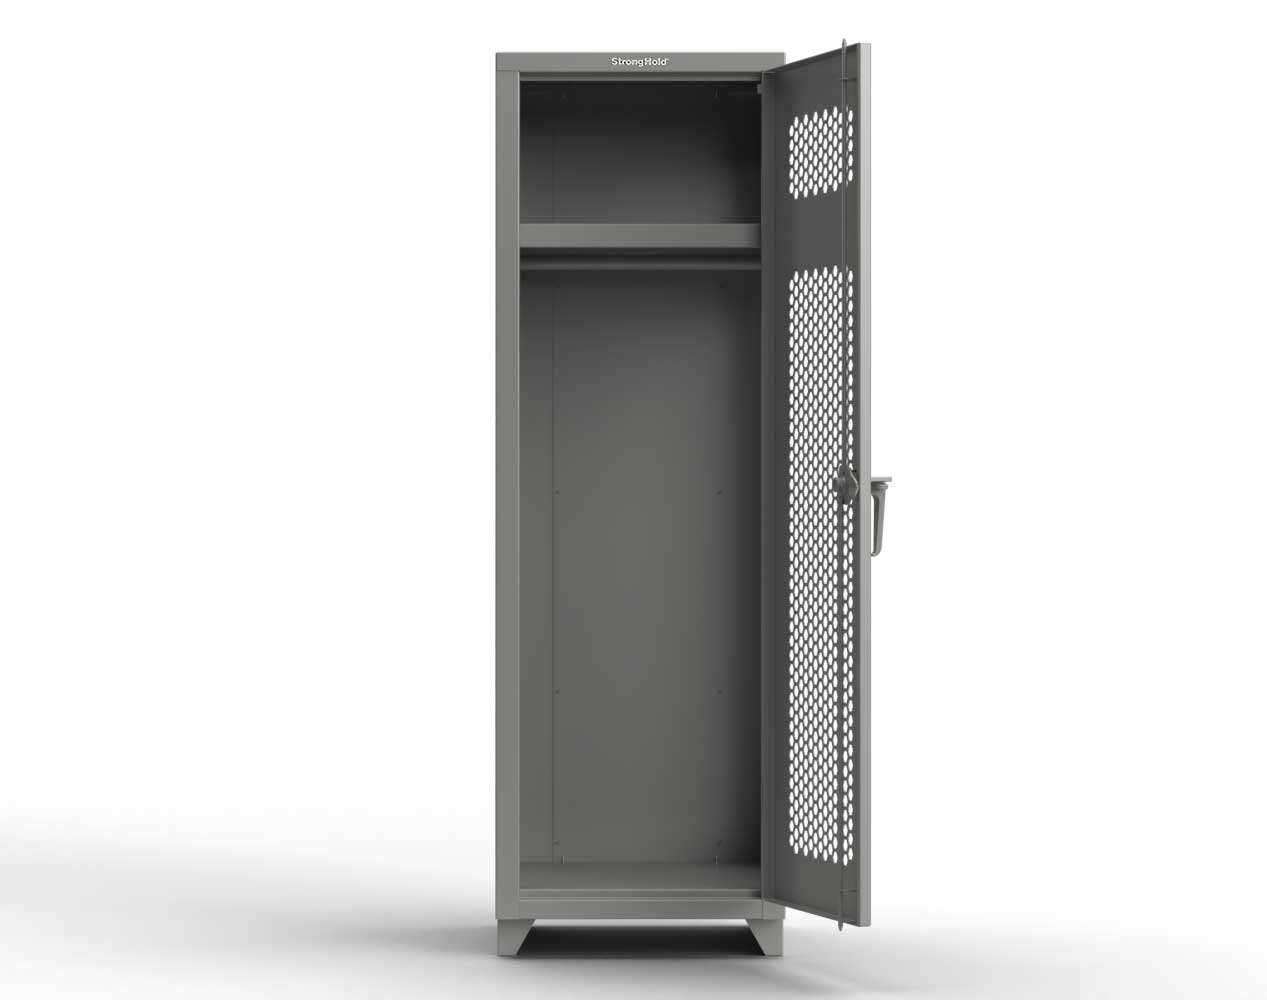 Extra Heavy Duty 14 GA Ventilated Single-Tier Locker with Shelf and Hanger Rod, 1 Compartment - 24 in. W x 24 in. D x 75 in. H